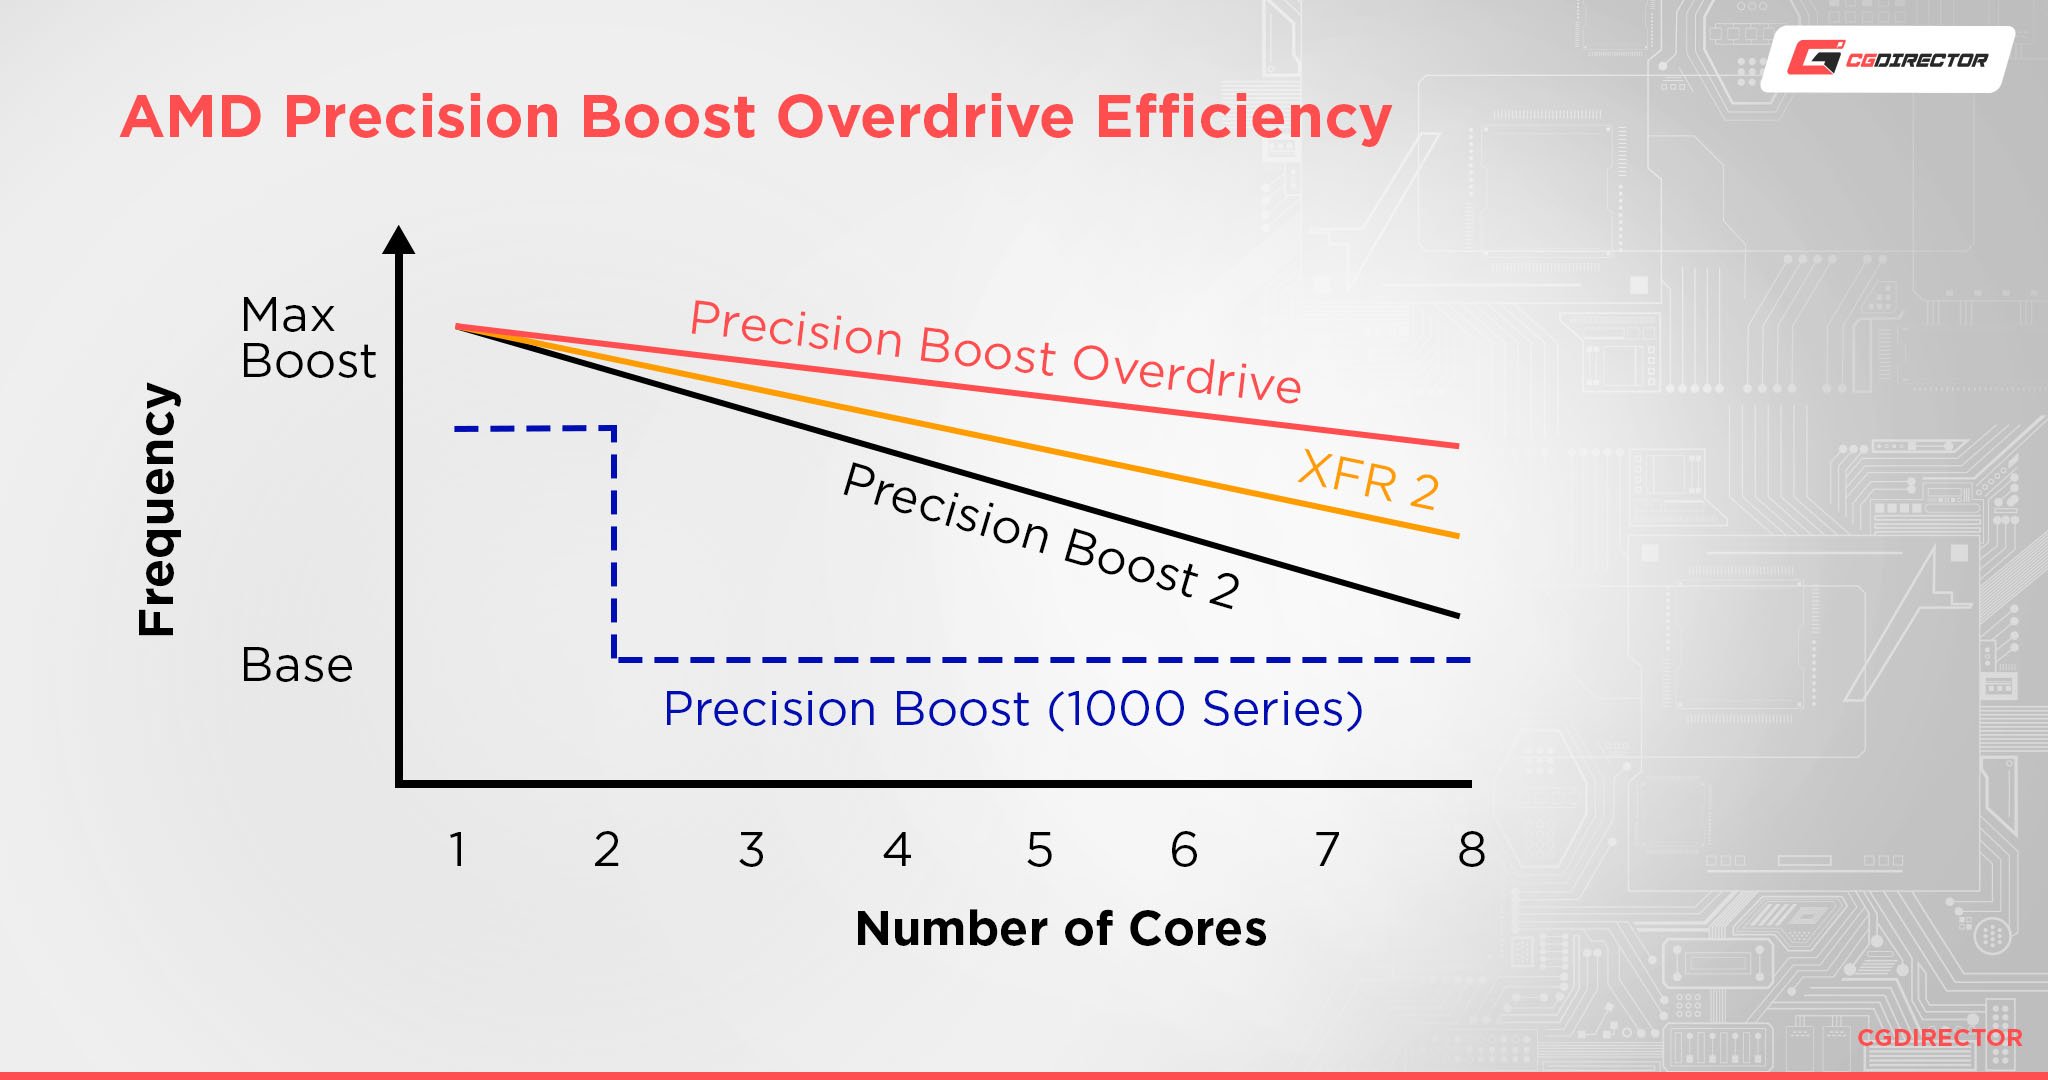 Precision boost overdrive efficiency